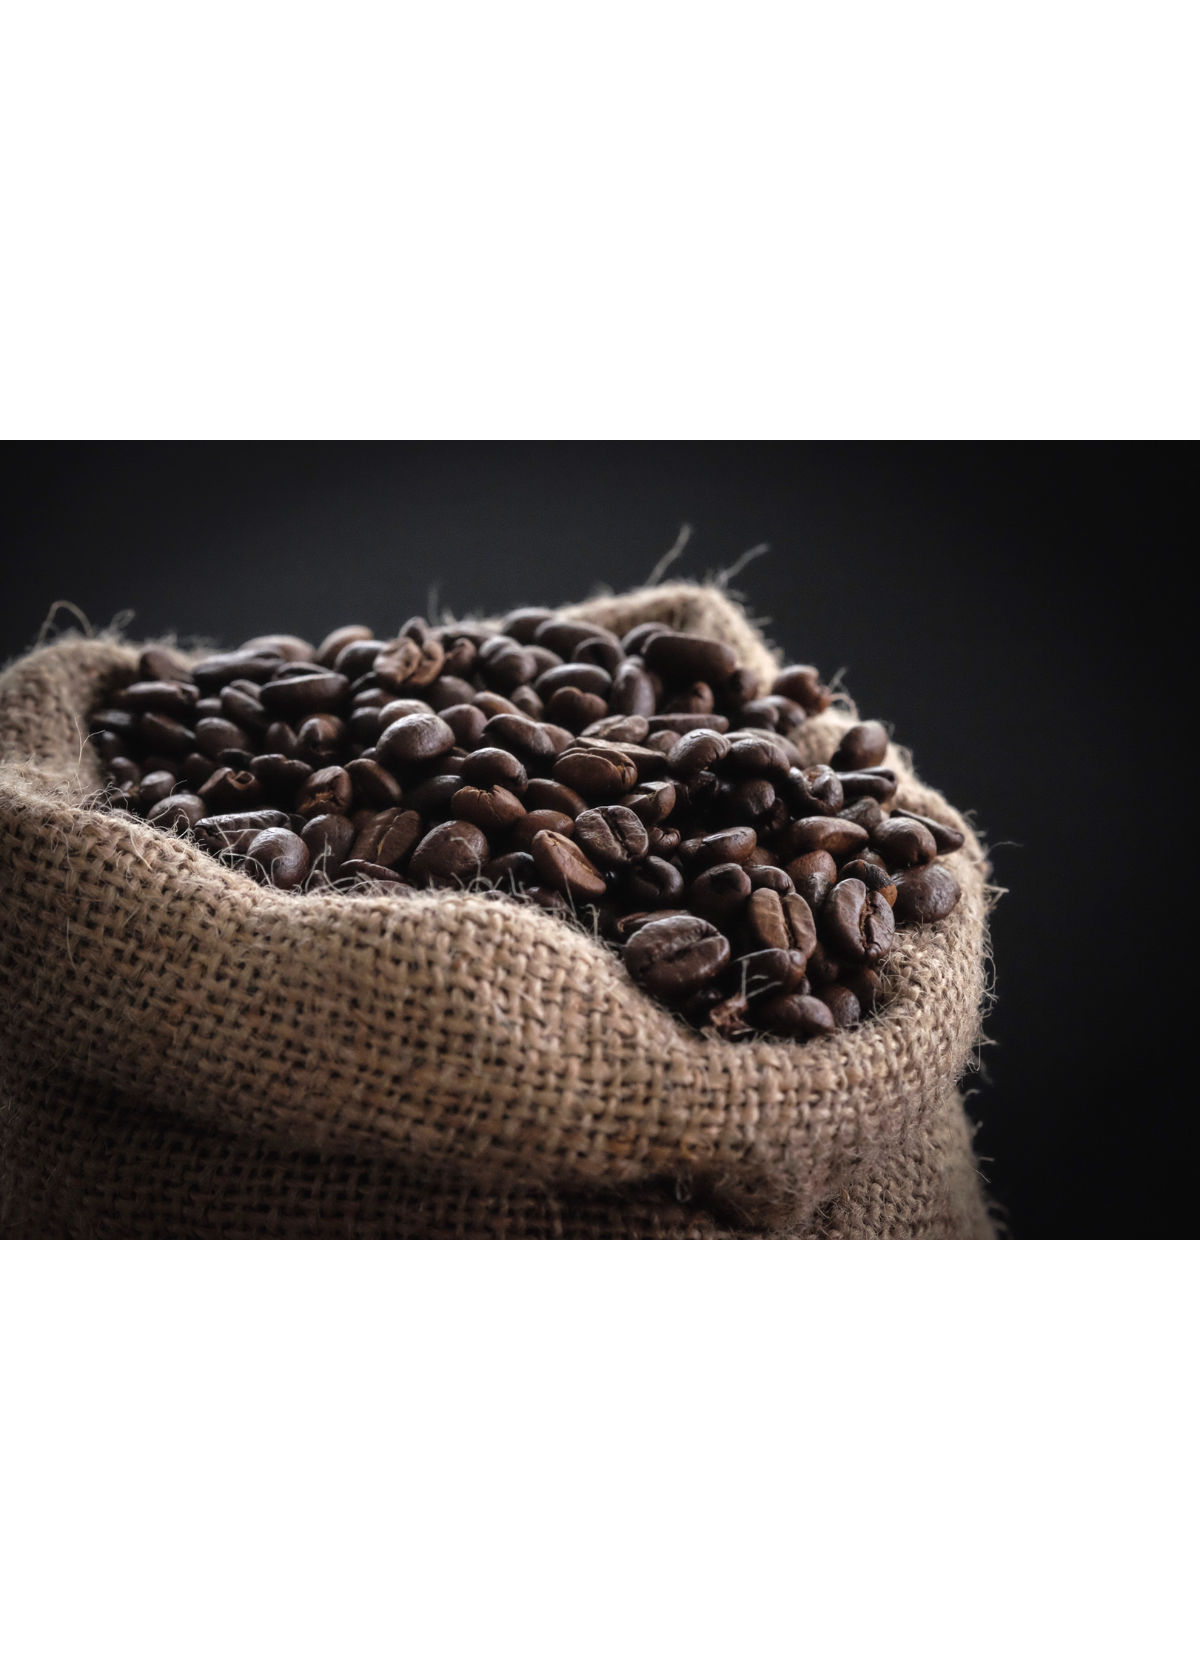 Brewing Perfection: Discover the Best Espresso Coffee Beans!